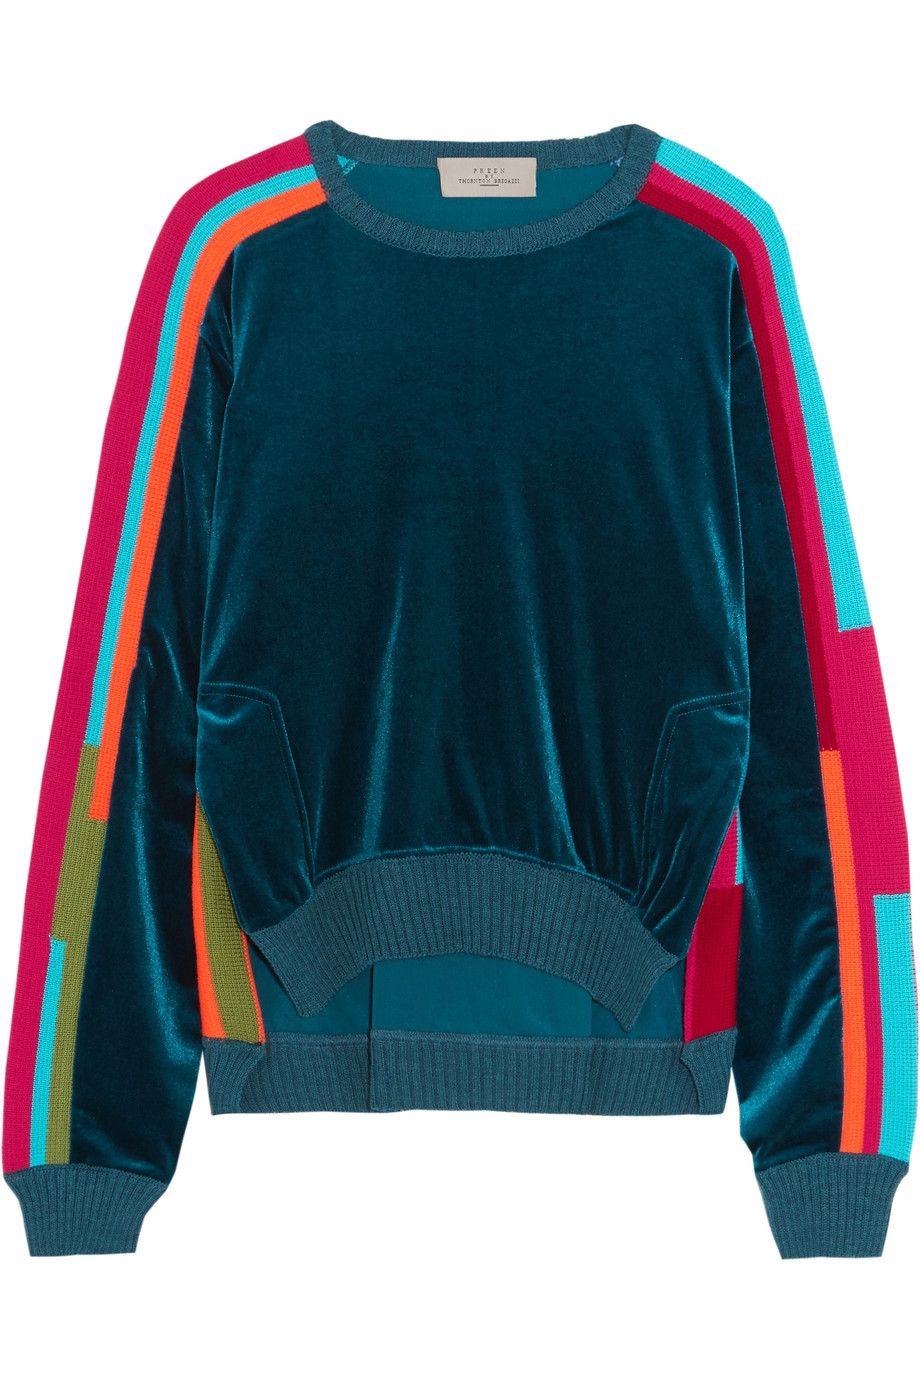 Clothing, Sleeve, Blue, Turquoise, Teal, Sweater, Outerwear, Long-sleeved t-shirt, Jersey, T-shirt, 